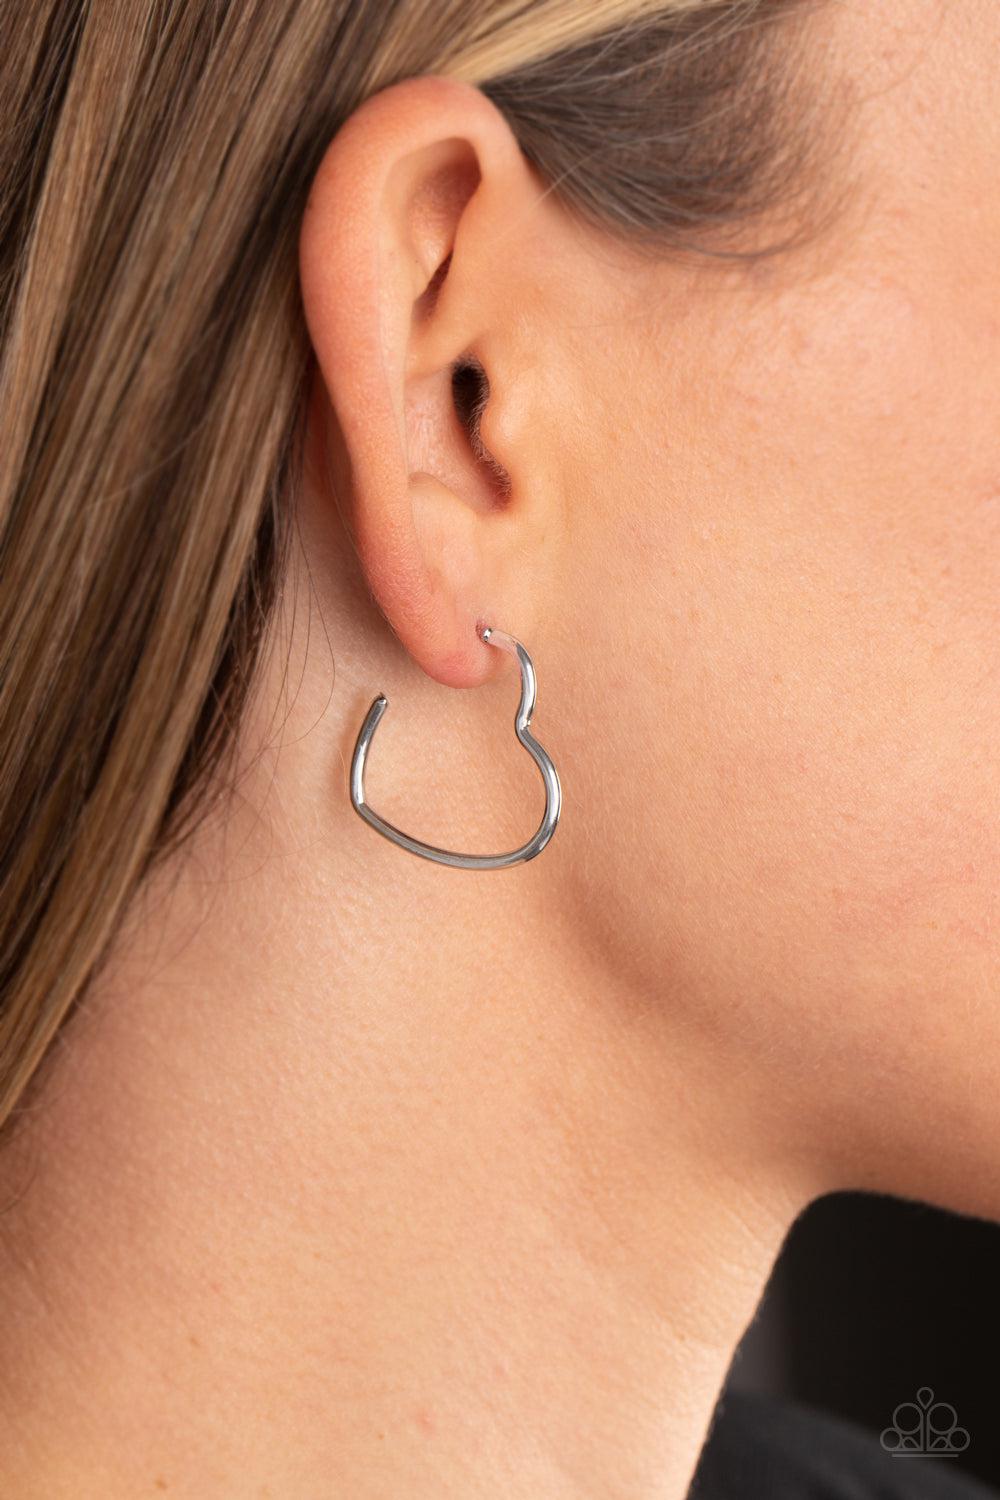 Burnished Beau Silver Heart Hoop Earrings - Paparazzi Accessories-on model - CarasShop.com - $5 Jewelry by Cara Jewels